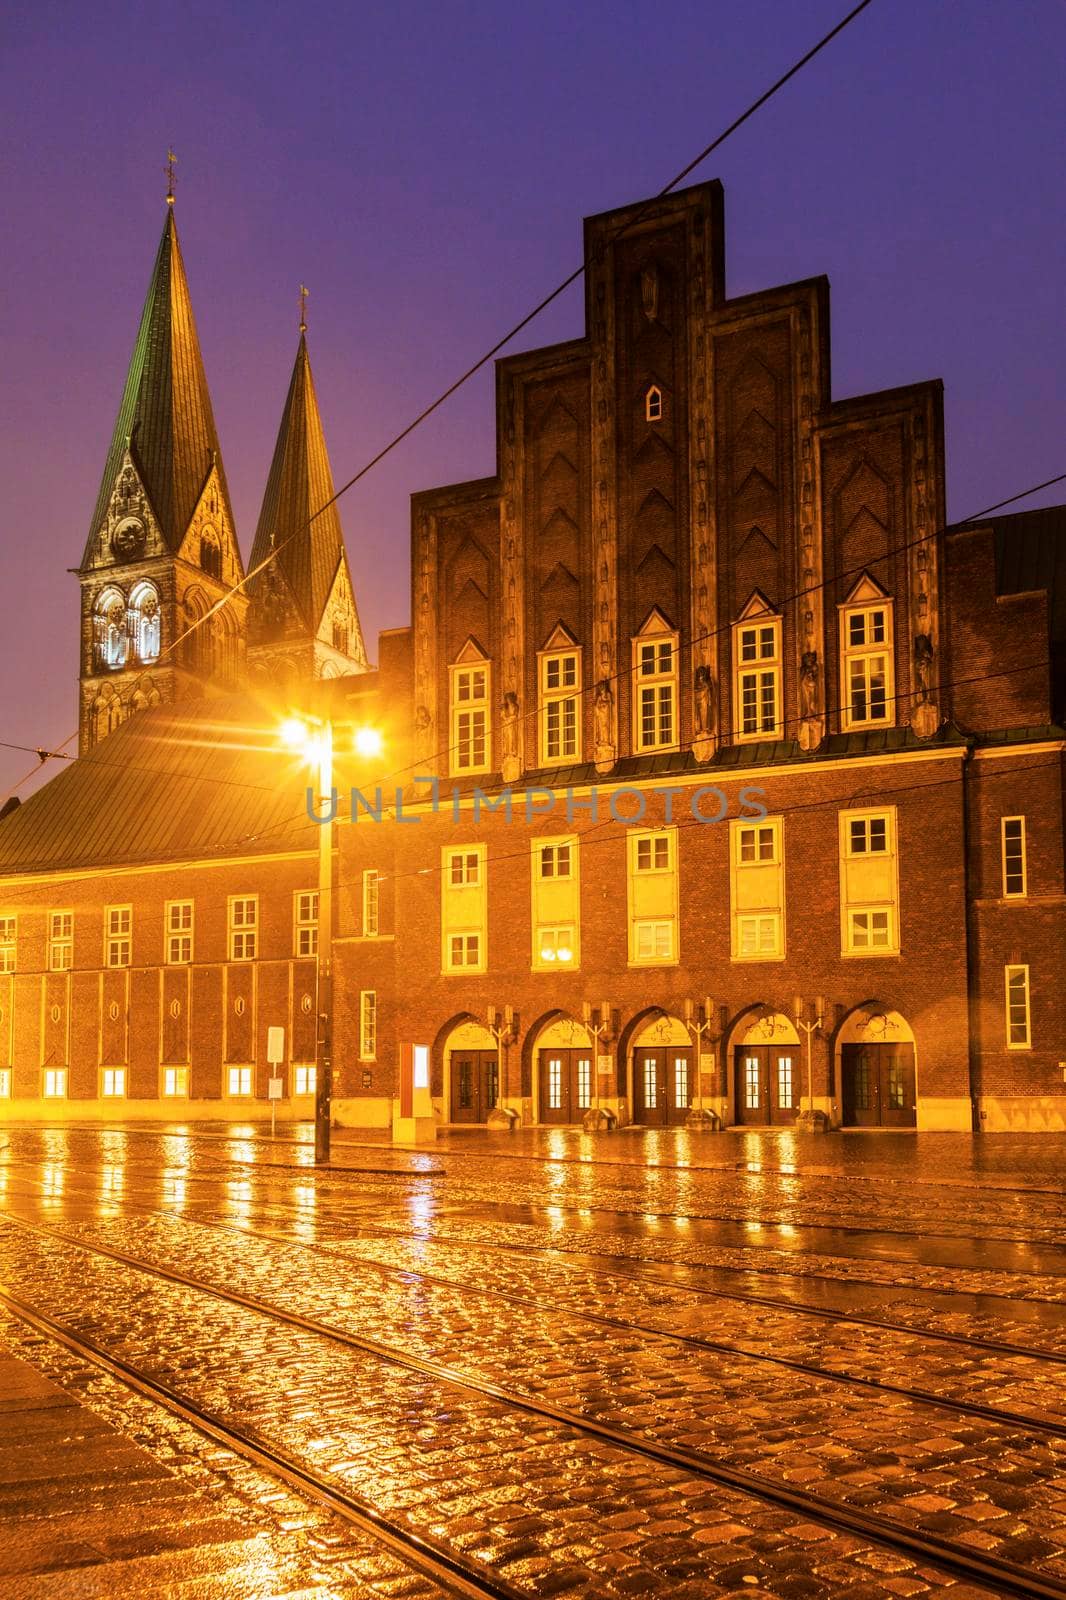 Rain by St. Peter's Cathedral in Bremen by benkrut